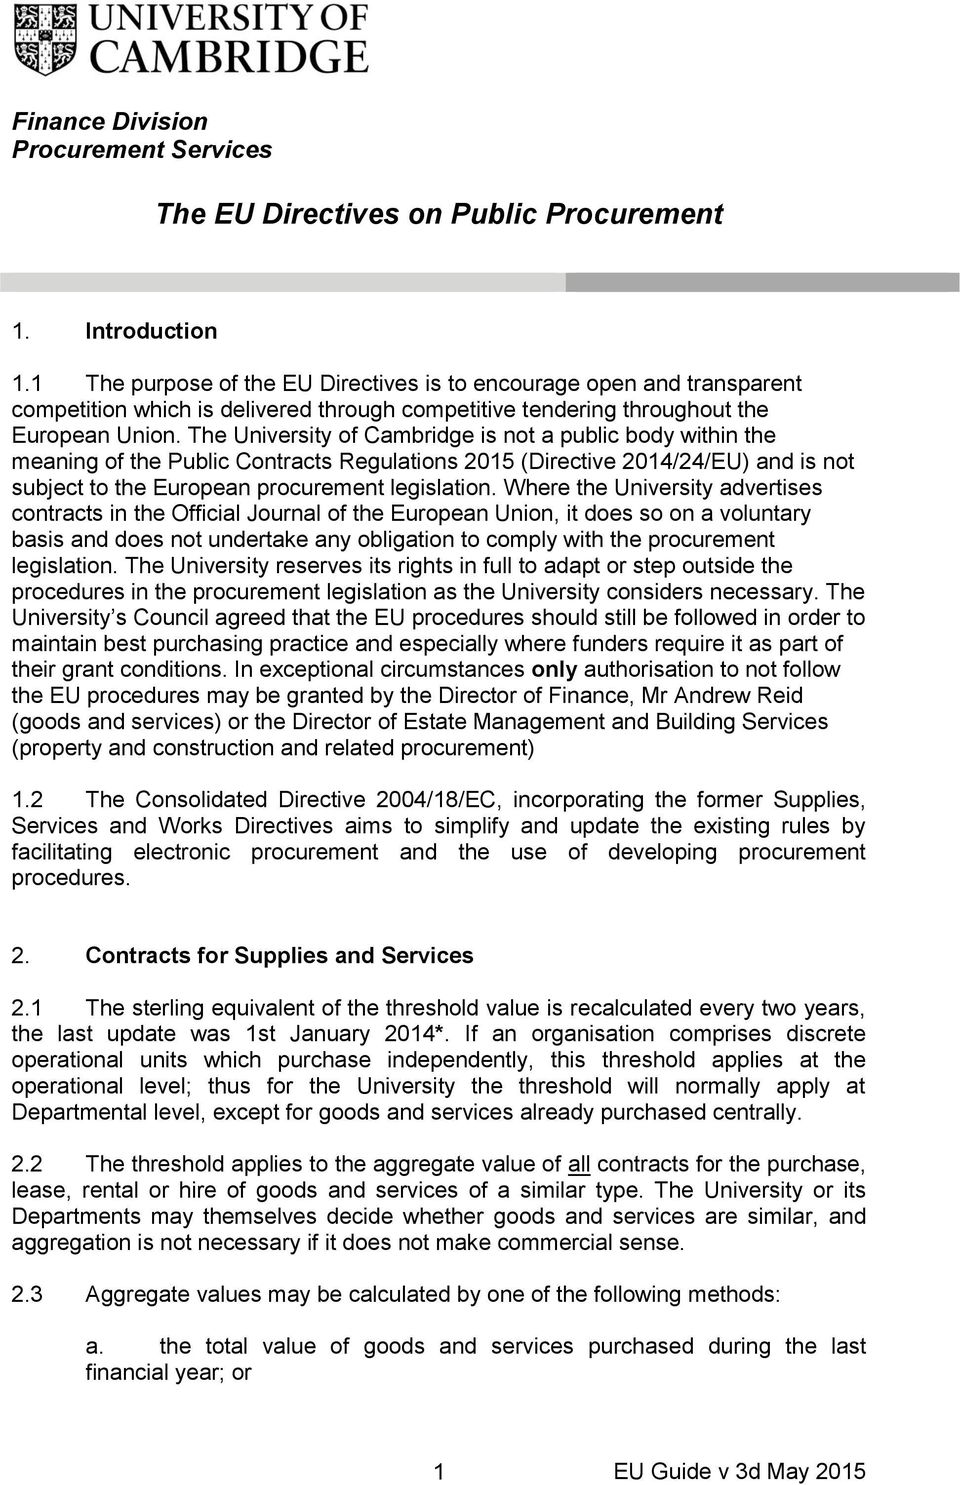 The University of Cambridge is not a public body within the meaning of the Public Contracts Regulations 2015 (Directive 2014/24/EU) and is not subject to the European procurement legislation.